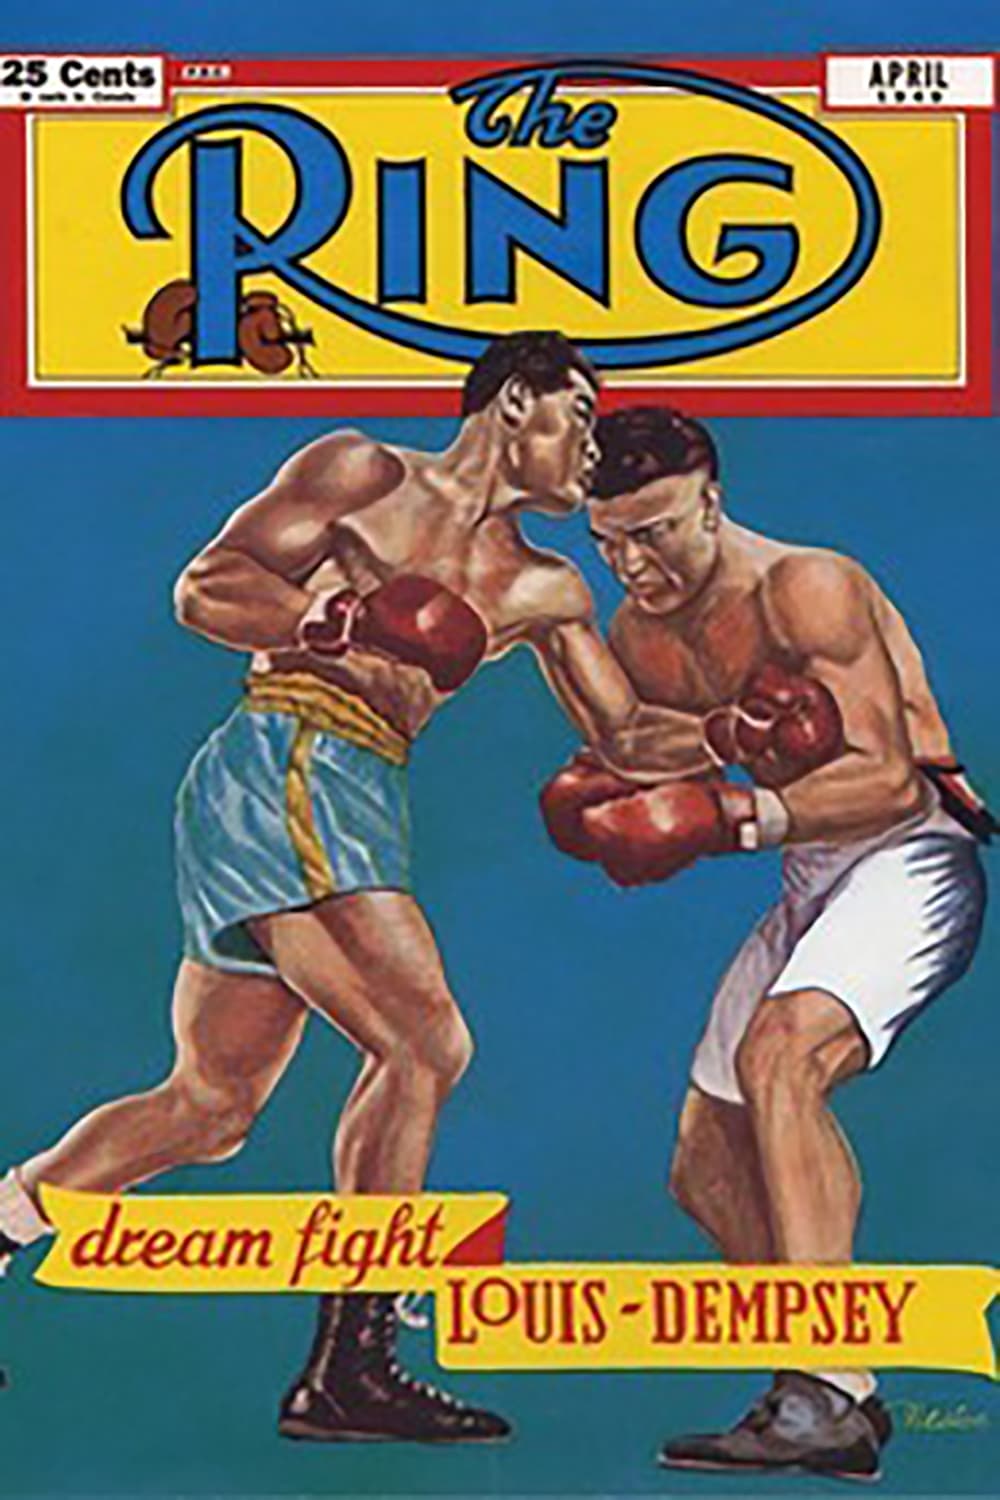 Kings of The Ring - History of Heavyweight Boxing 1919-1990